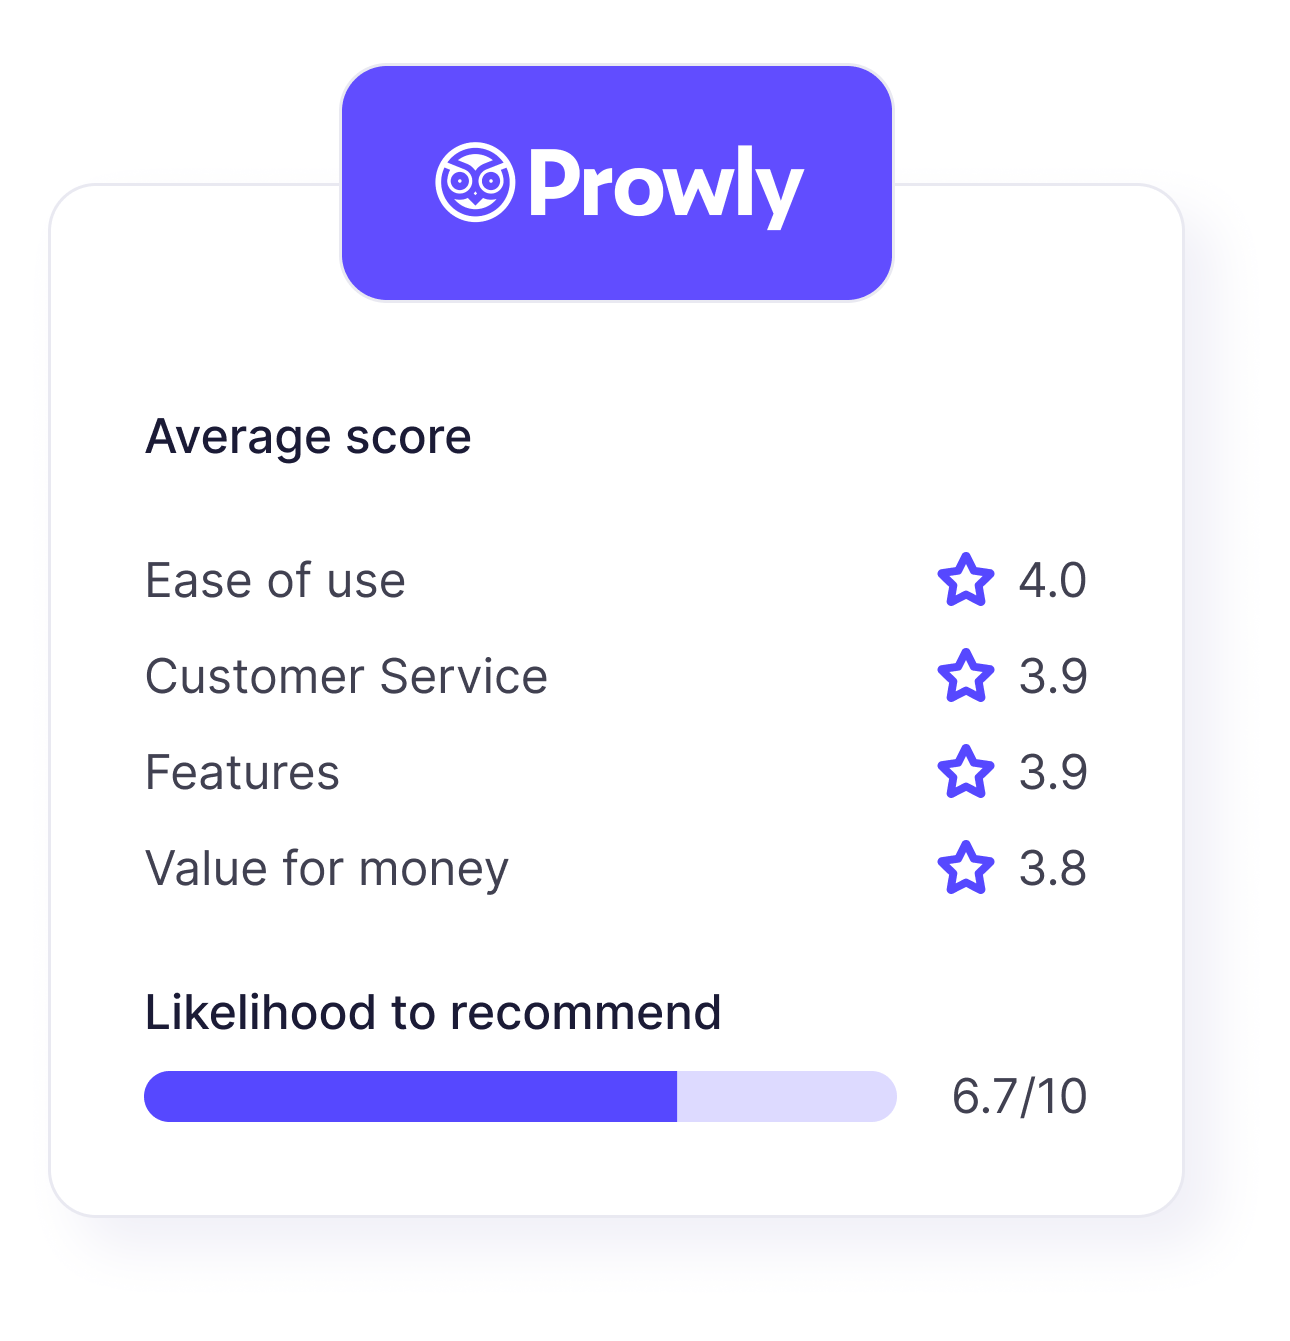 Prowly ratings on Capterra